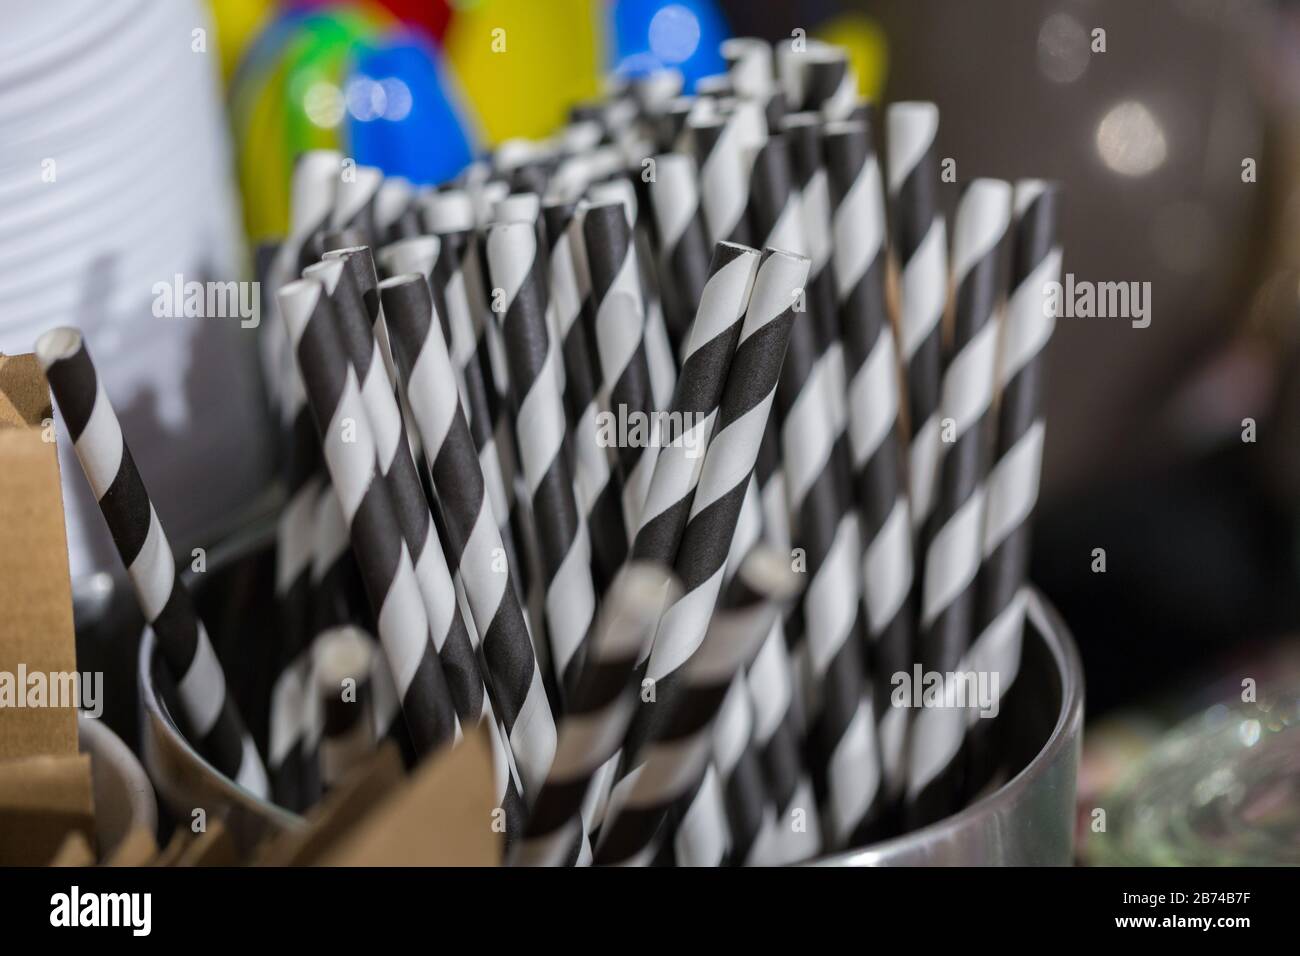 Close up of black & white striped drinking straws. Used for hot and cold beverages. In the background plastic spoons in different colors. Stock Photo